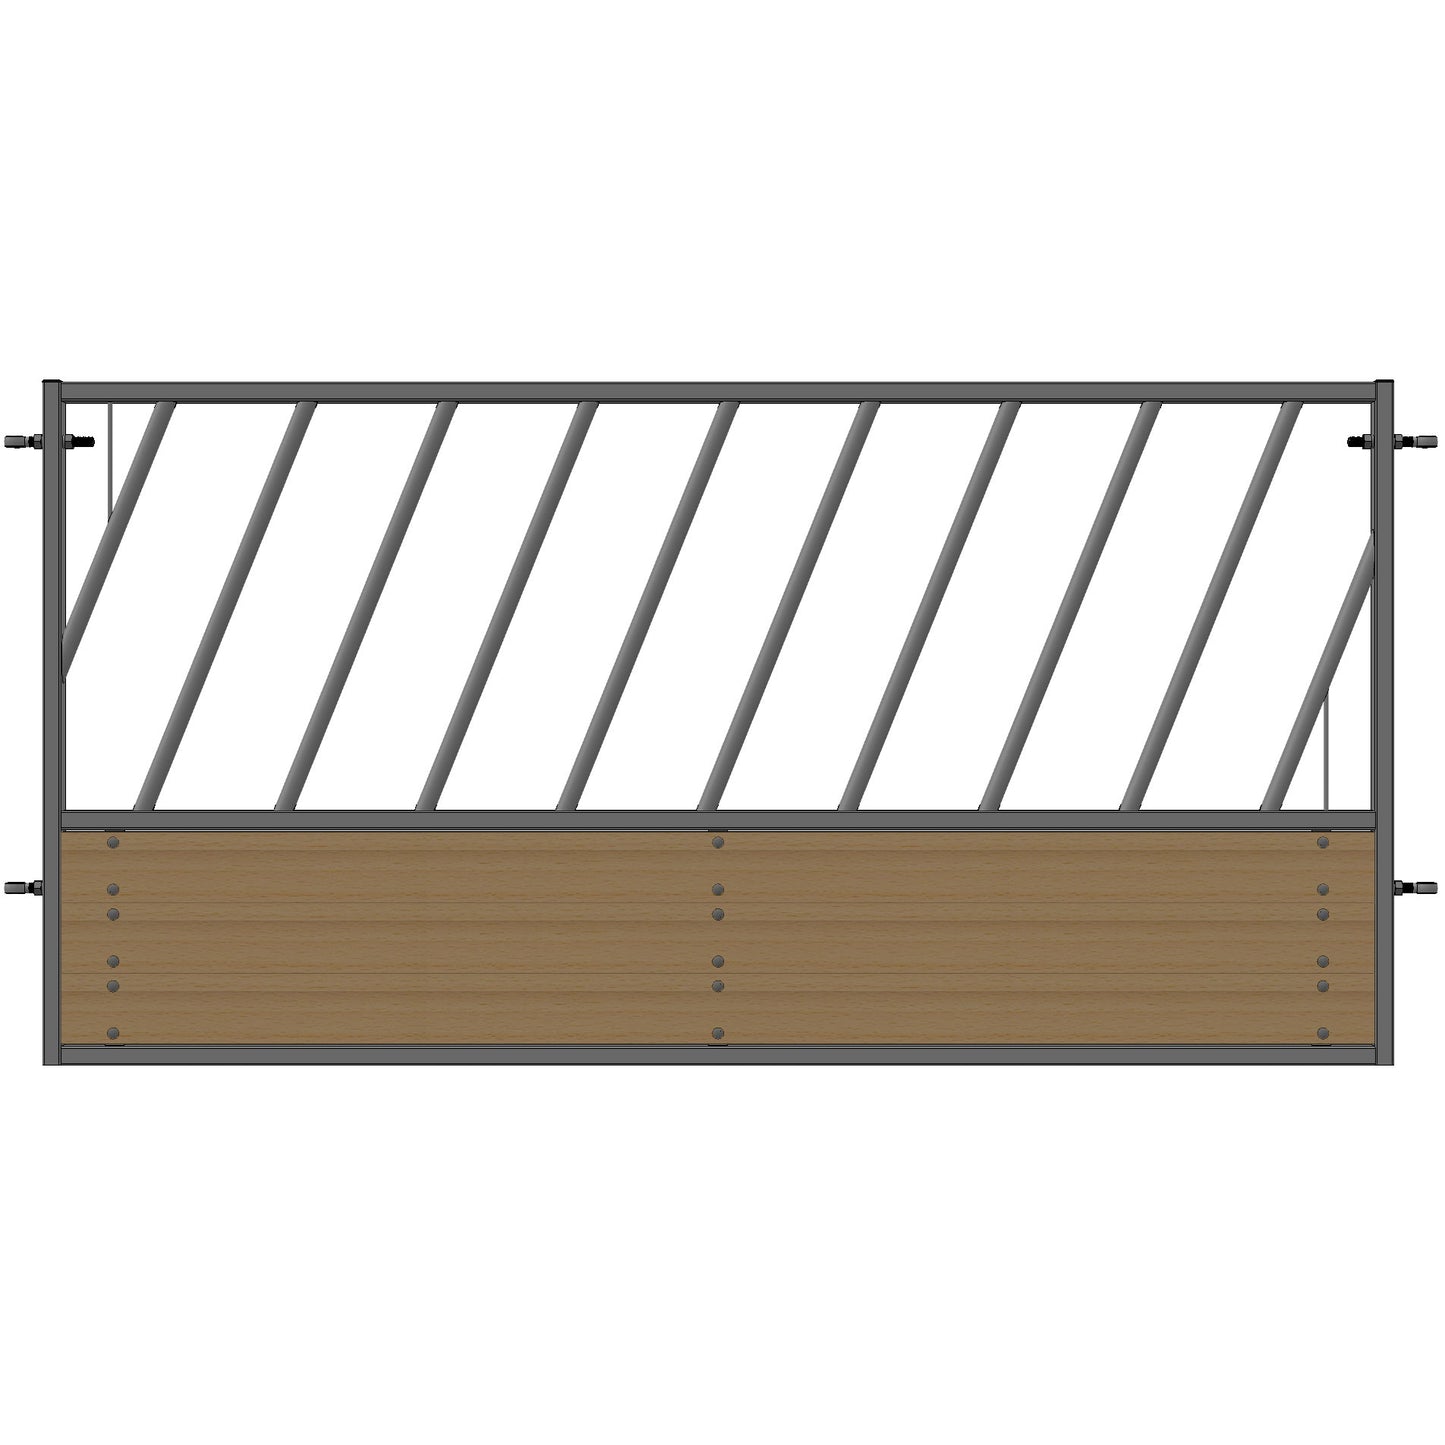 Market Young Stock Diagonal Feed Barrier Panel with timber base